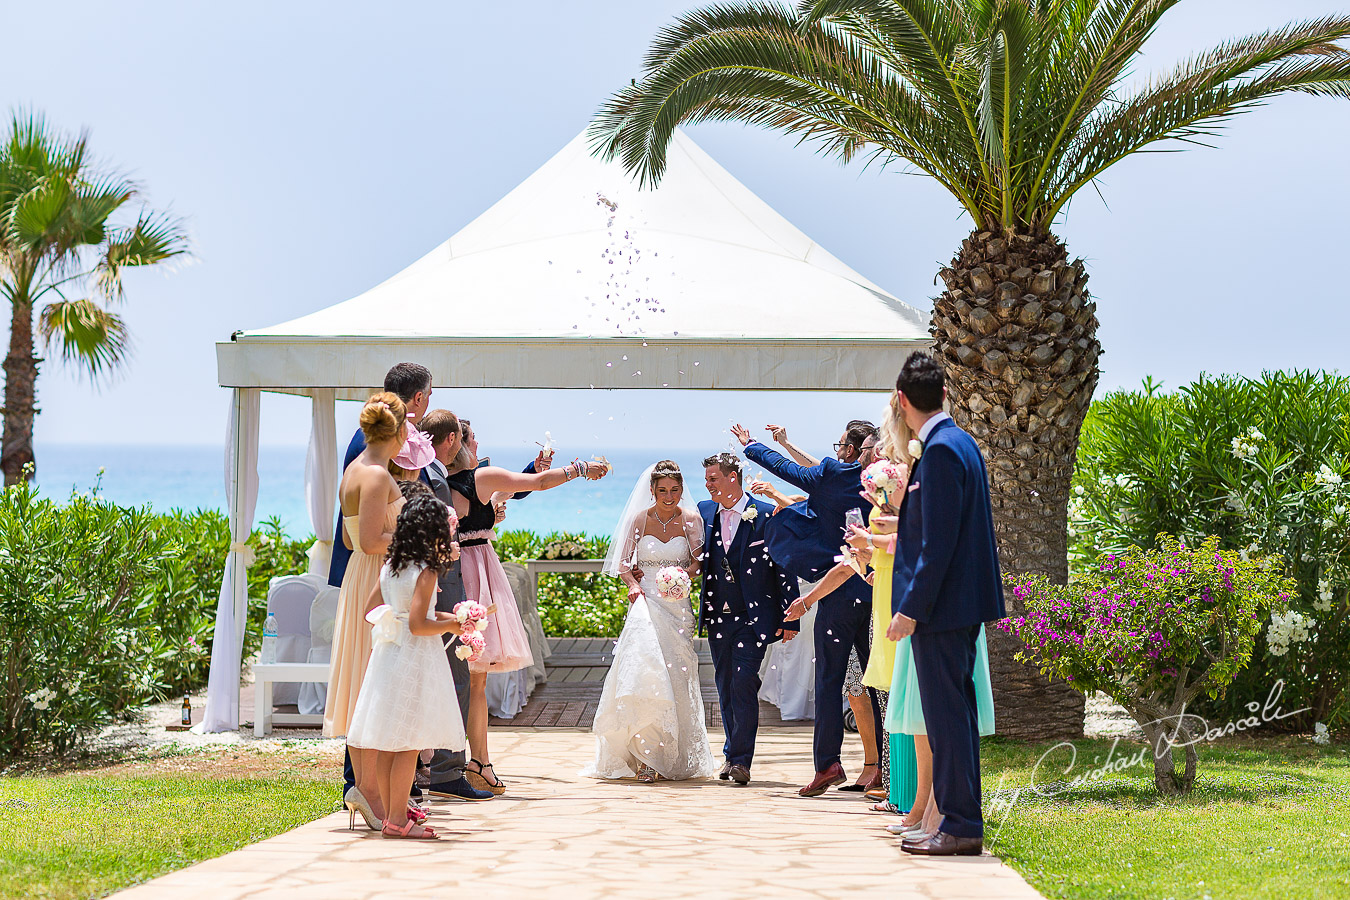 Wedding moment photographed at Nissi Beach Resort in Ayia Napa, Cyprus by Cristian Dascalu.